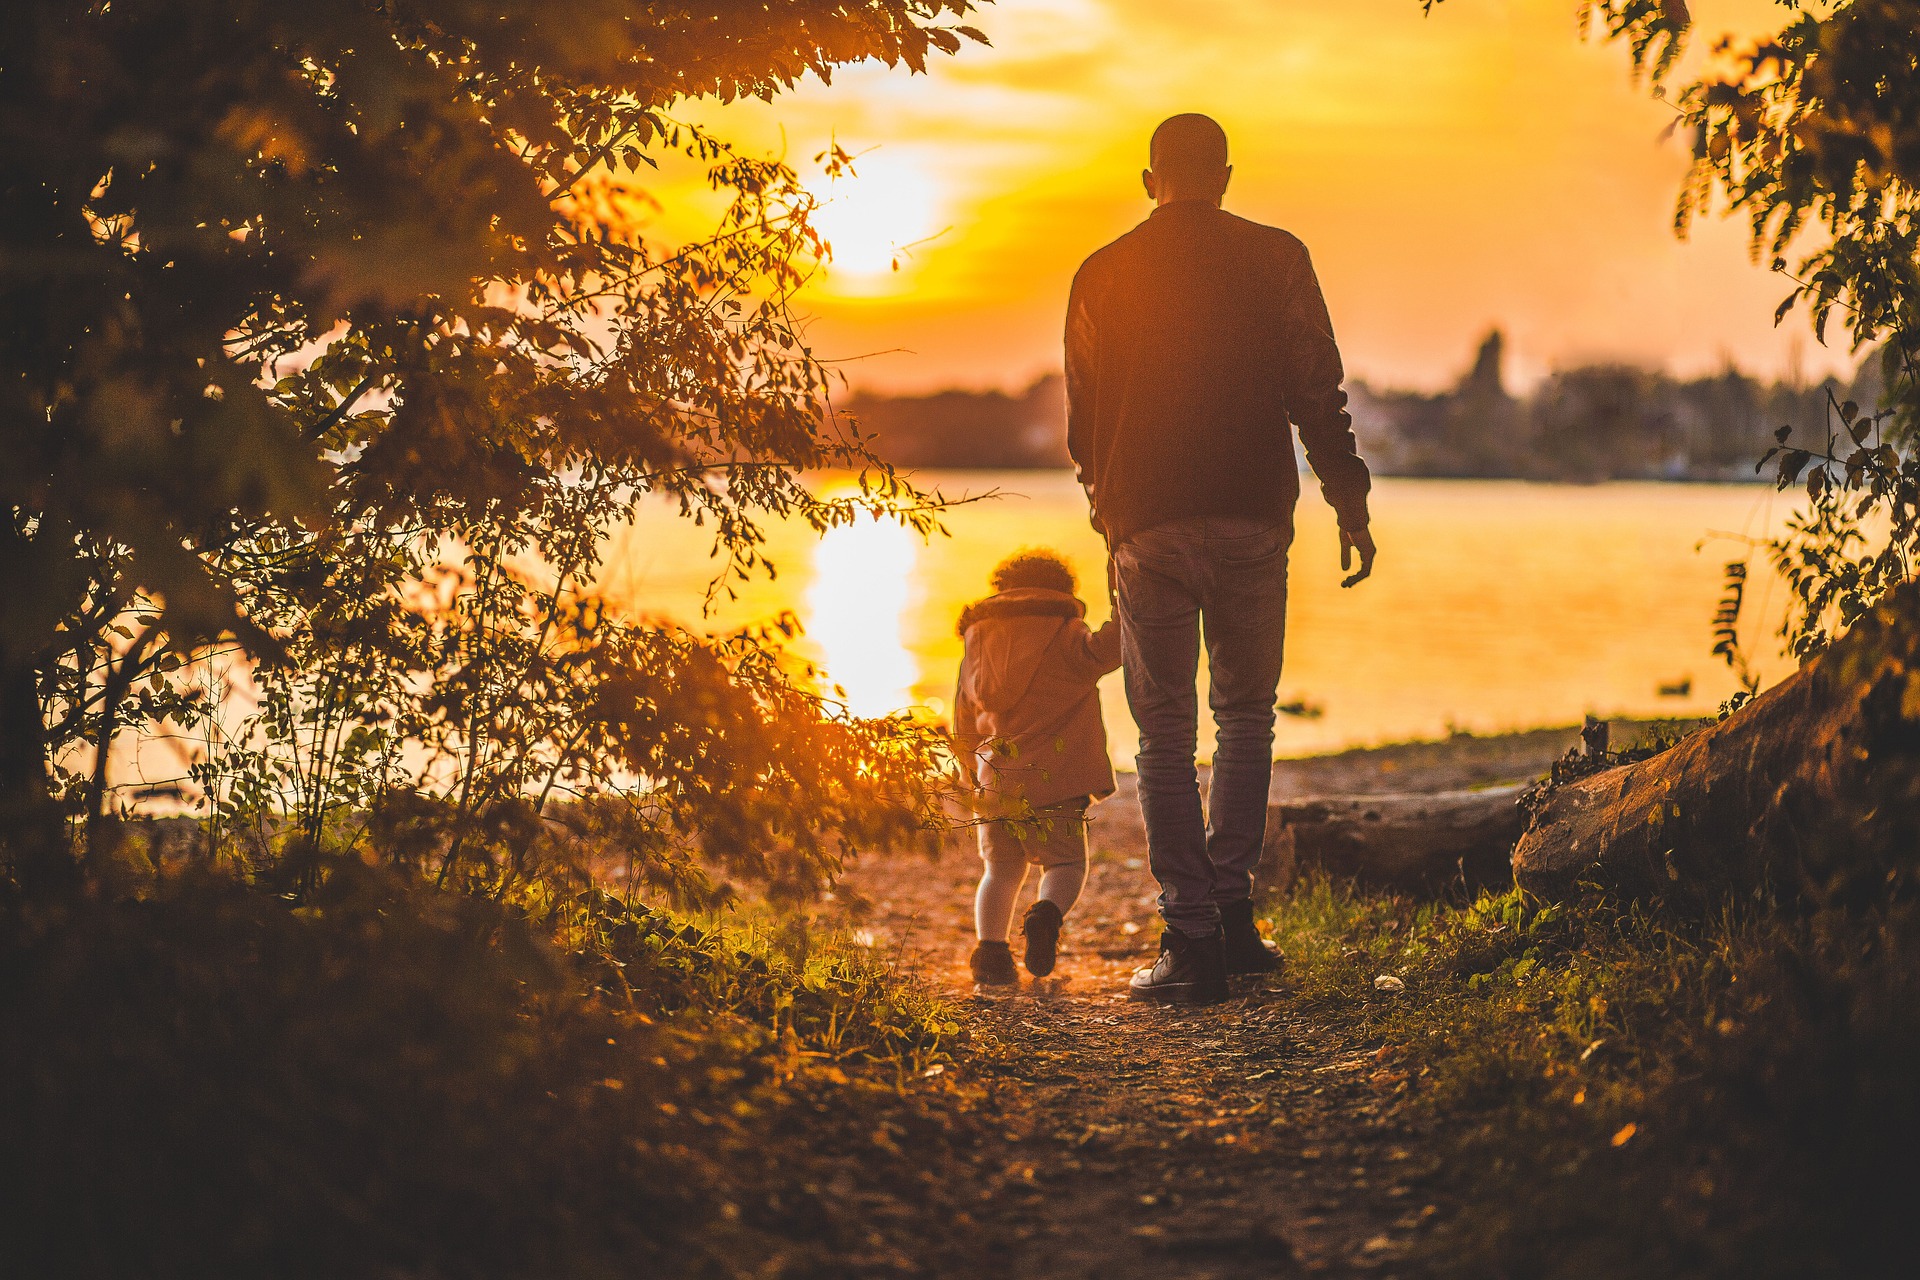 Father and child walking hand in hand against a golden sunset, symbolizing the timeless connection of family history and generational bonds.